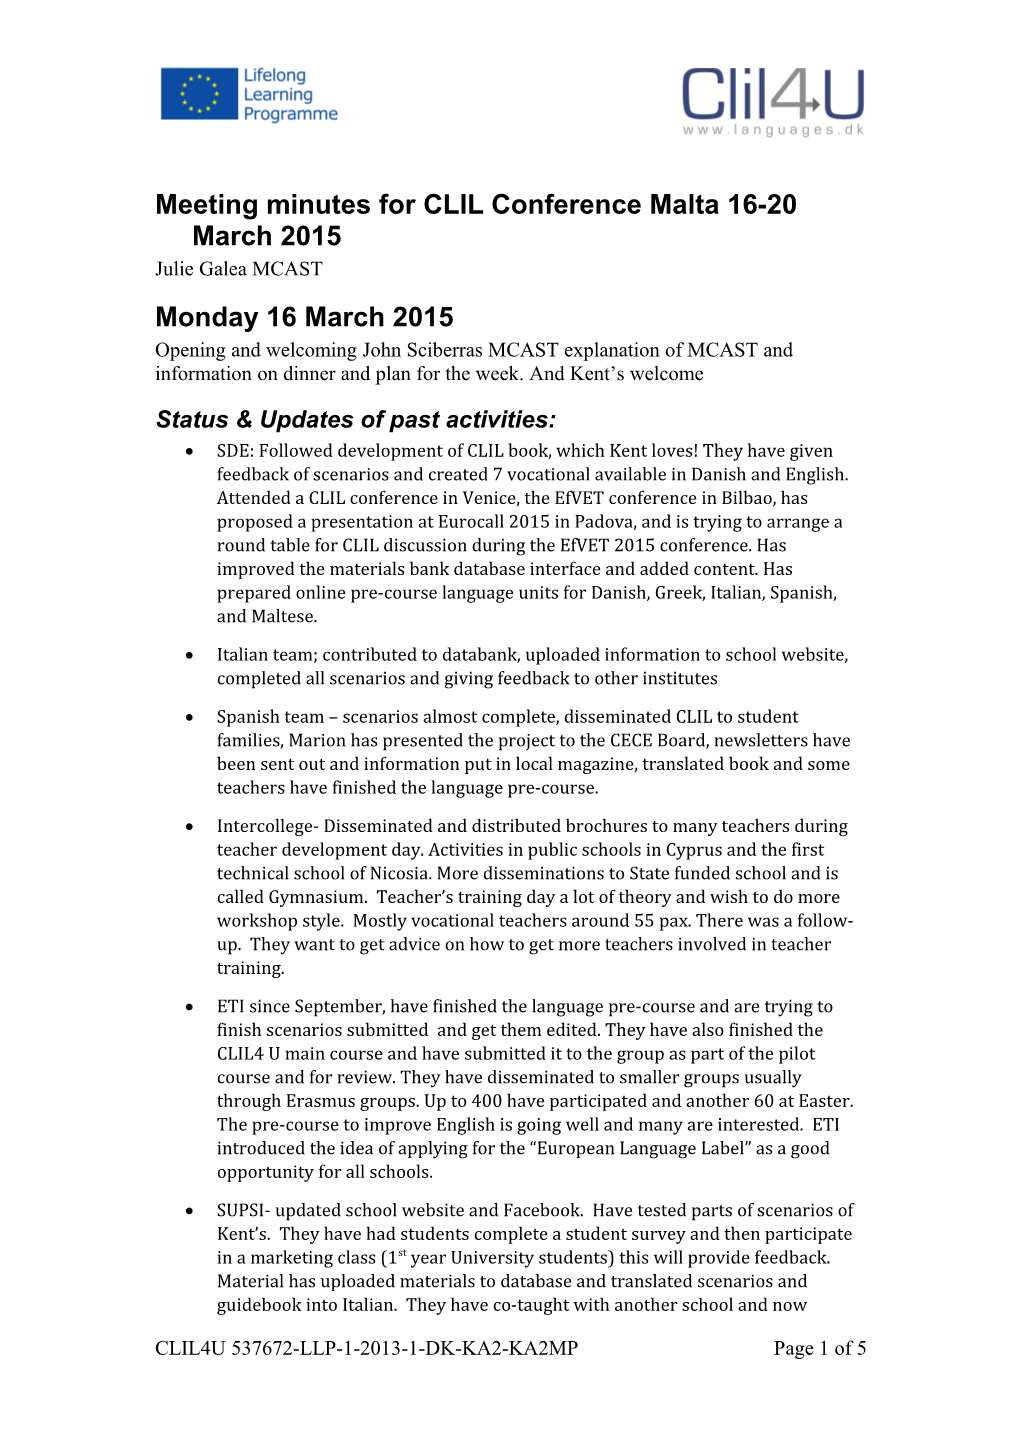 Meeting Minutes for CLIL Conference Malta 16-20 March 2015